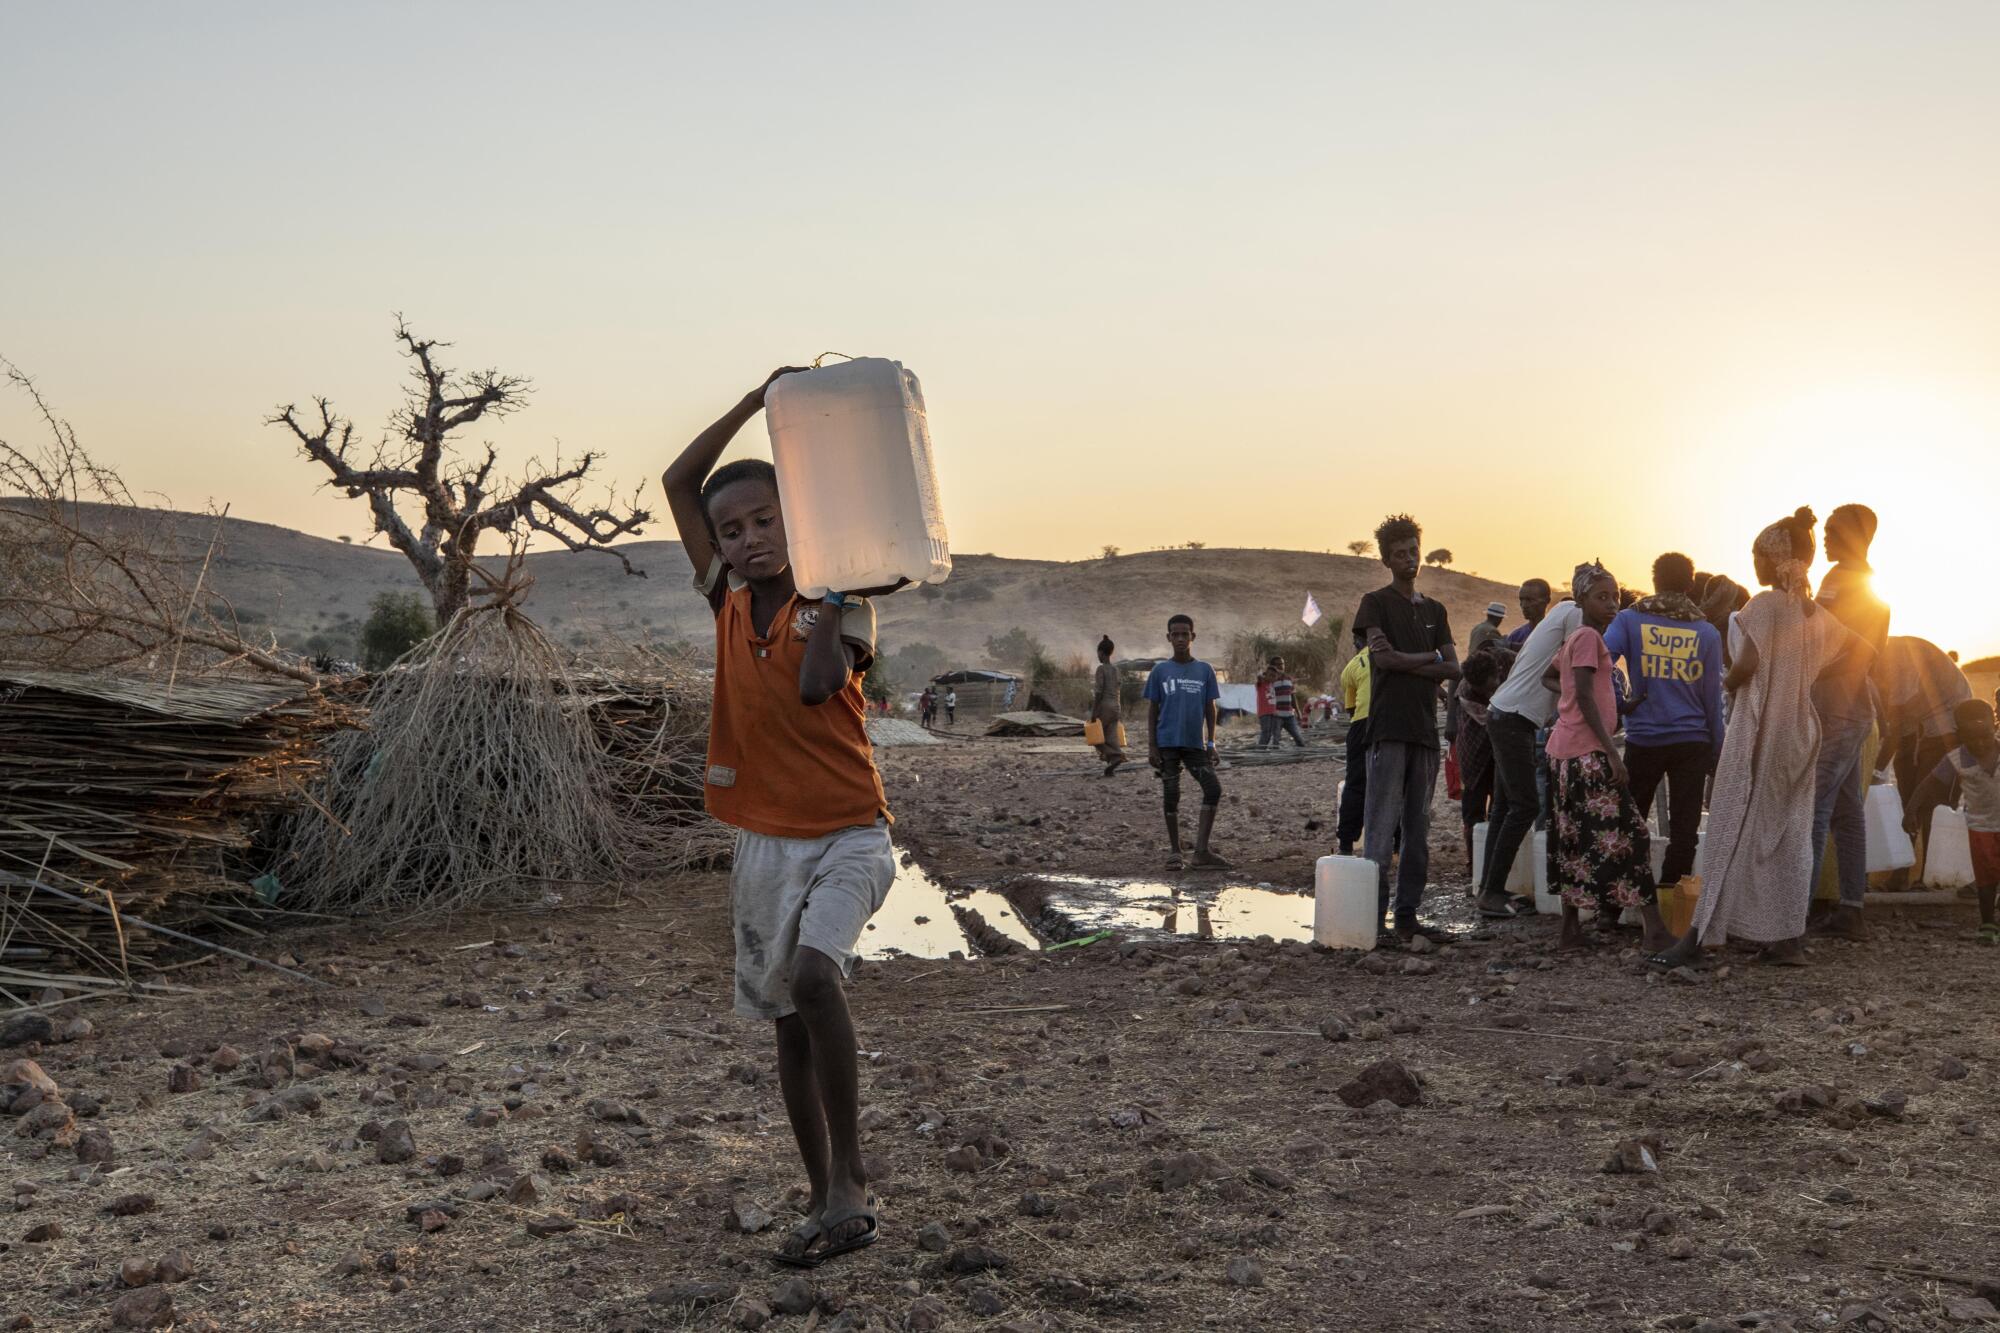 A Tigray boy who fled the conflict in Ethiopia's Tigray region, carries water, at a refugee camp in eastern Sudan.